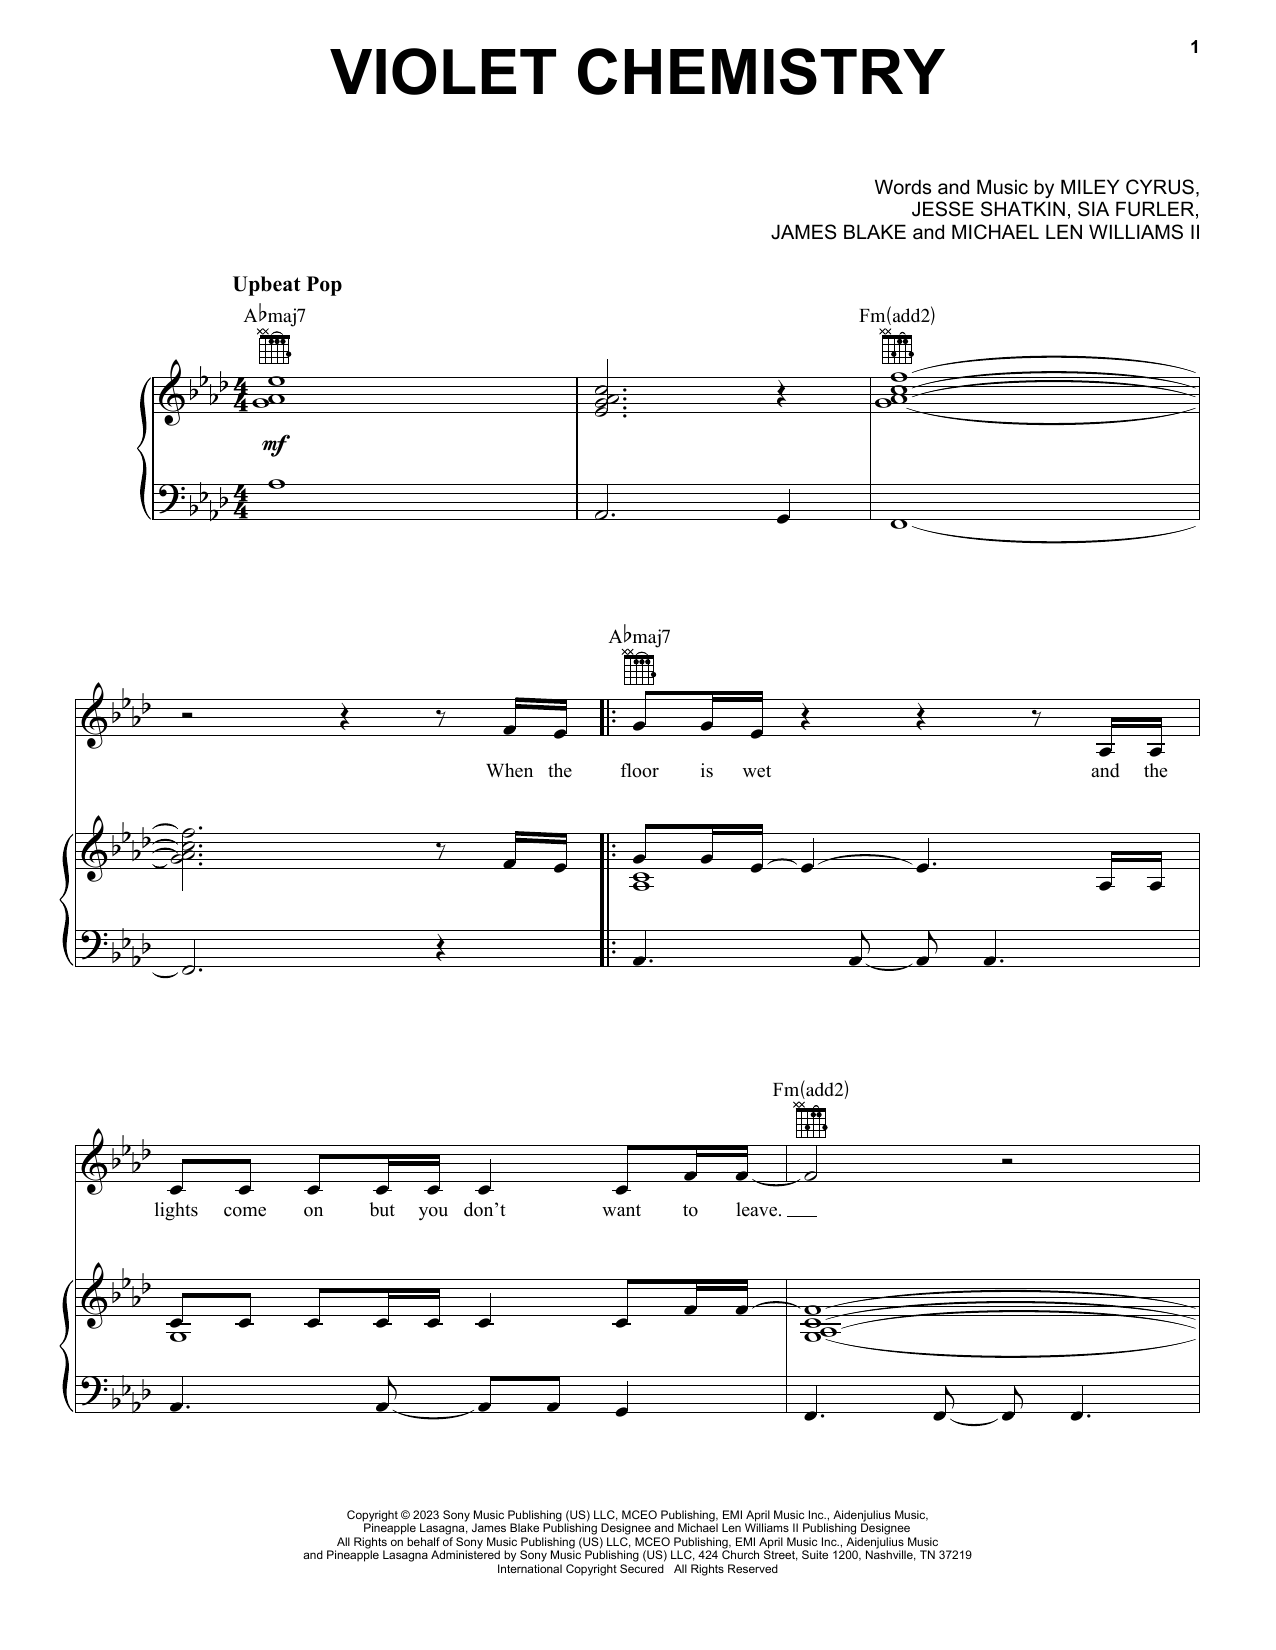 Download Miley Cyrus Violet Chemistry Sheet Music